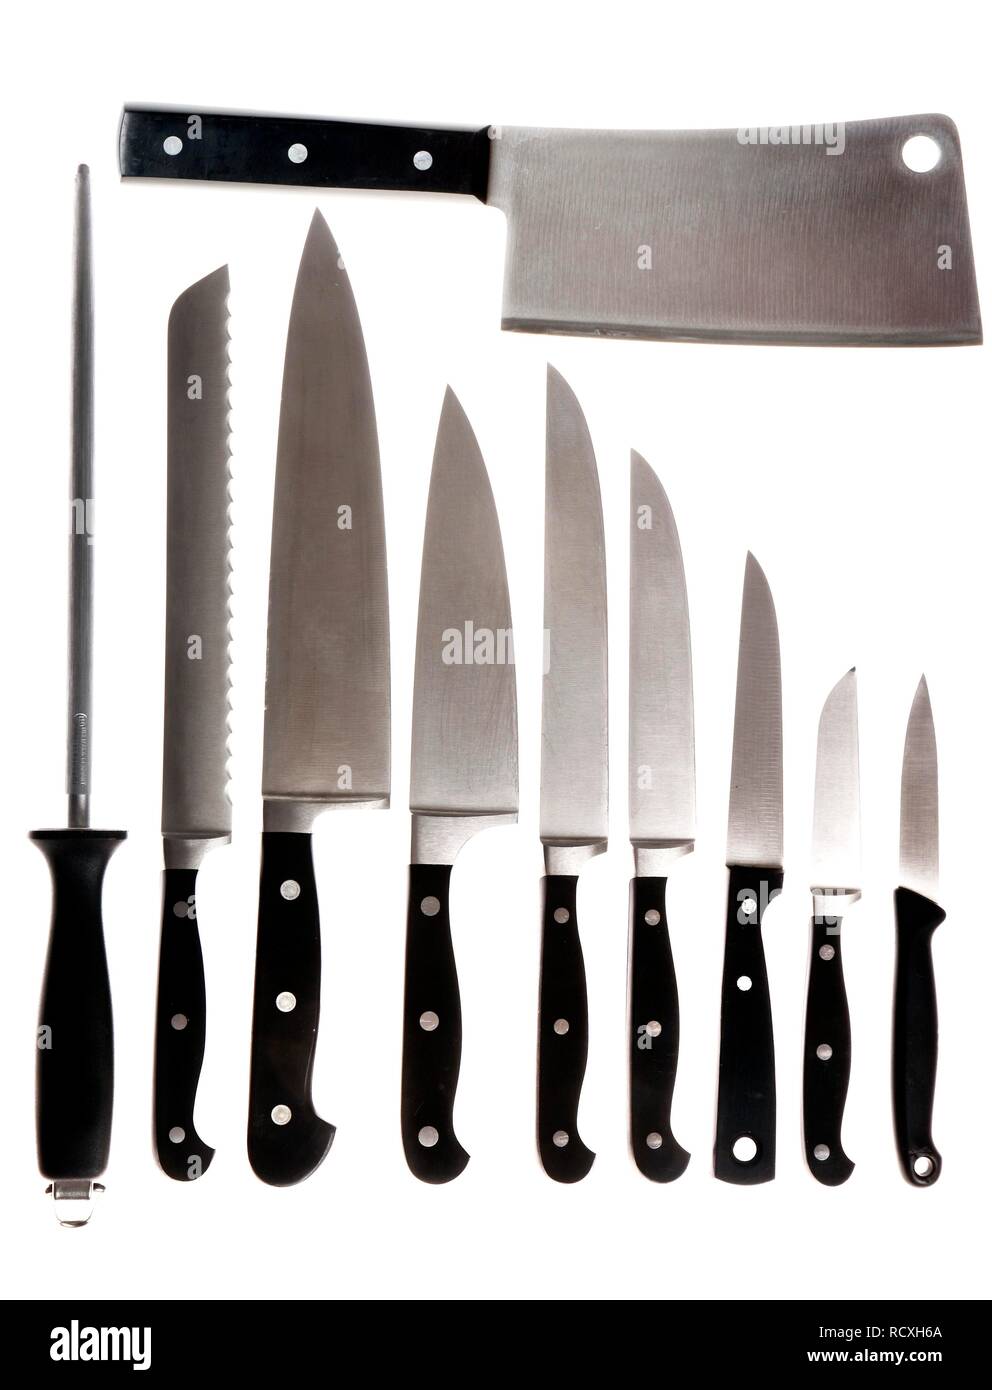 Various kitchen knives, sharpening steel, chef's knife, bread knife, filleting knife, vegetable knife and a cleaver Stock Photo